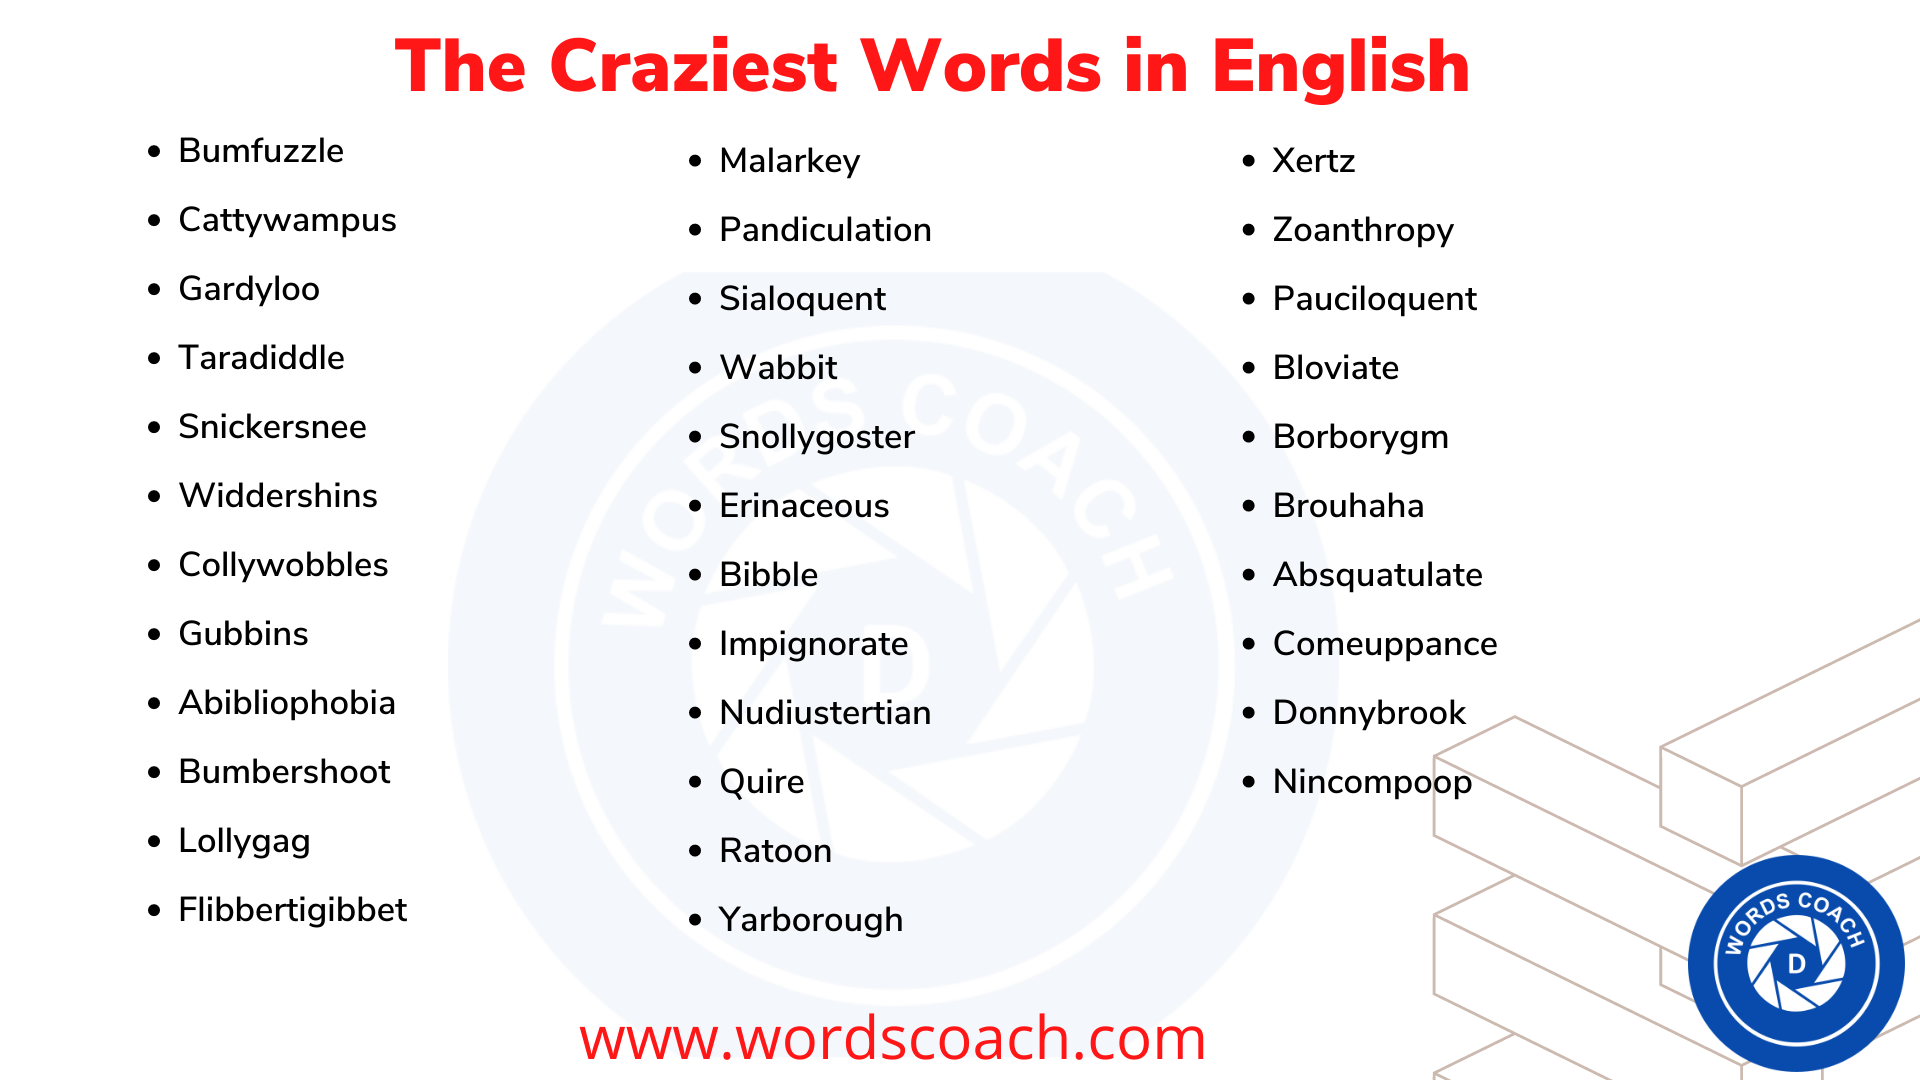 The Craziest Words in English